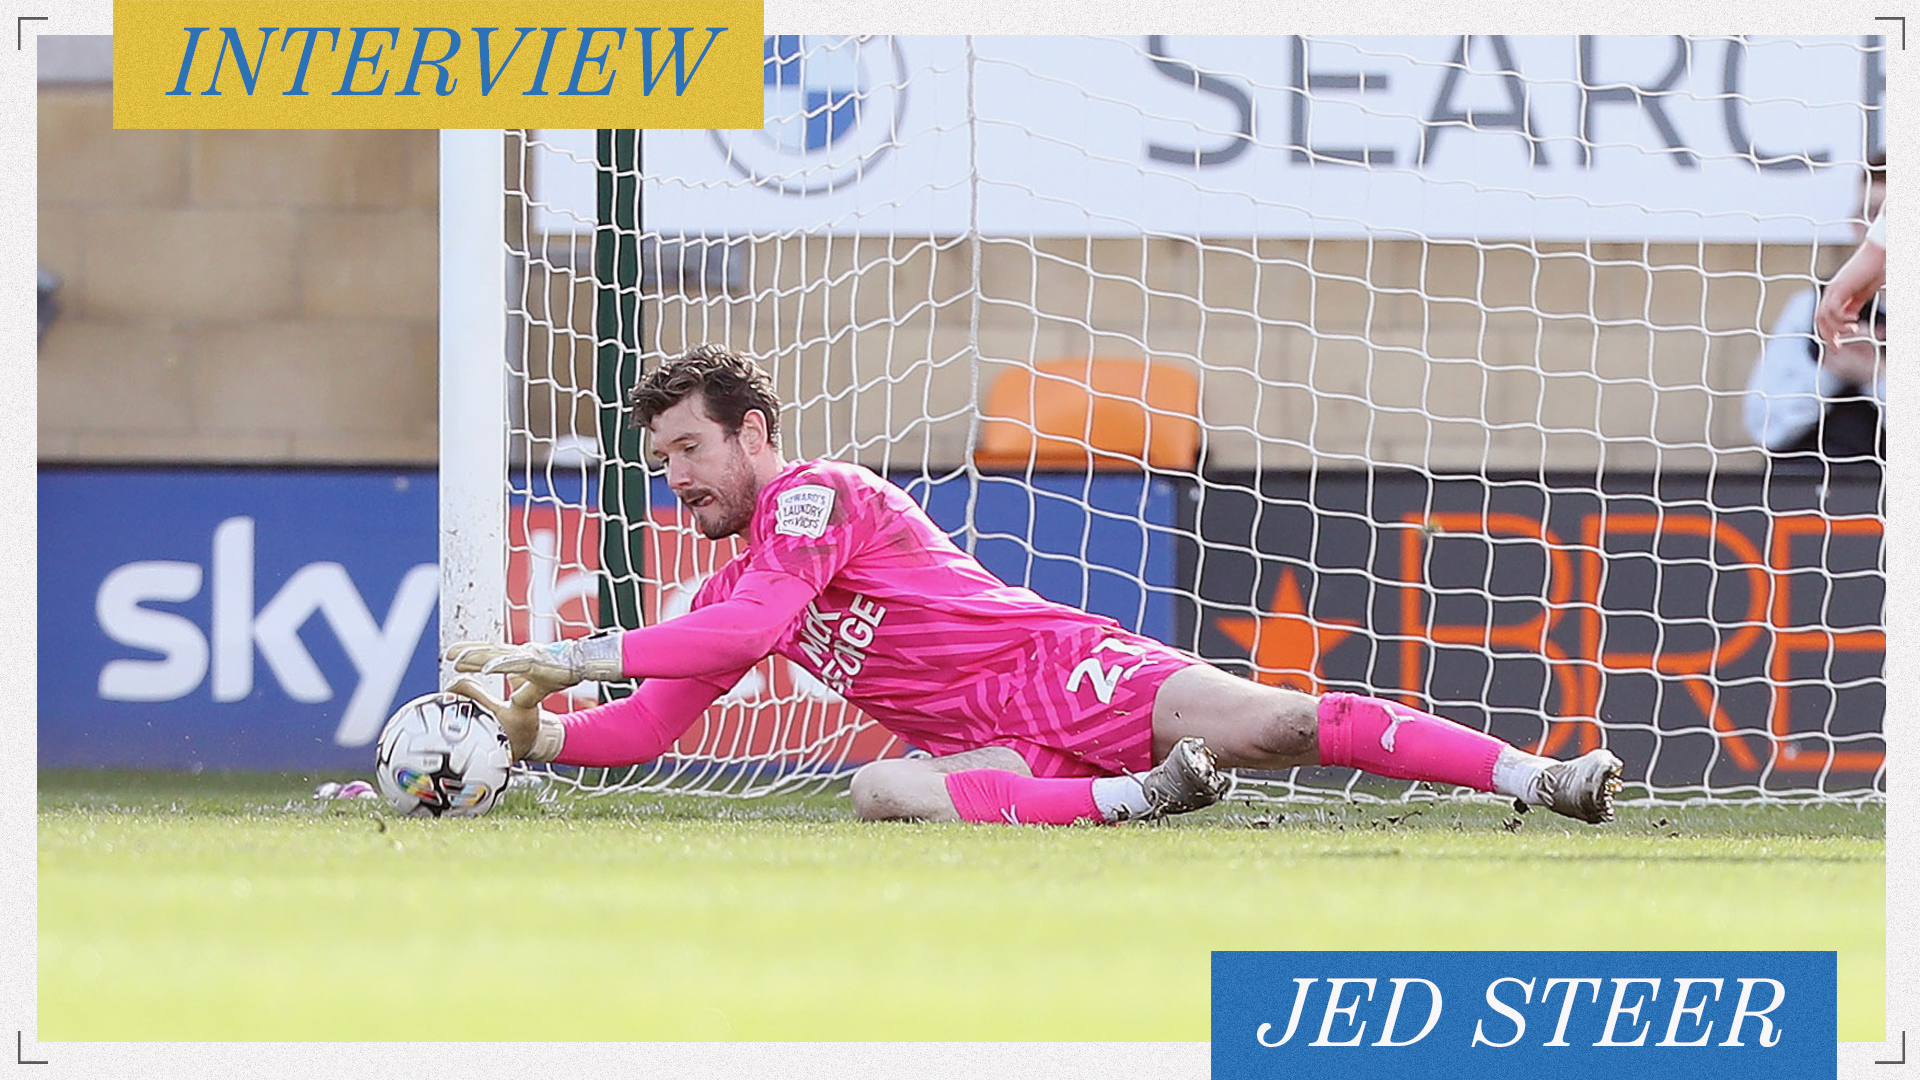 Jed Steer